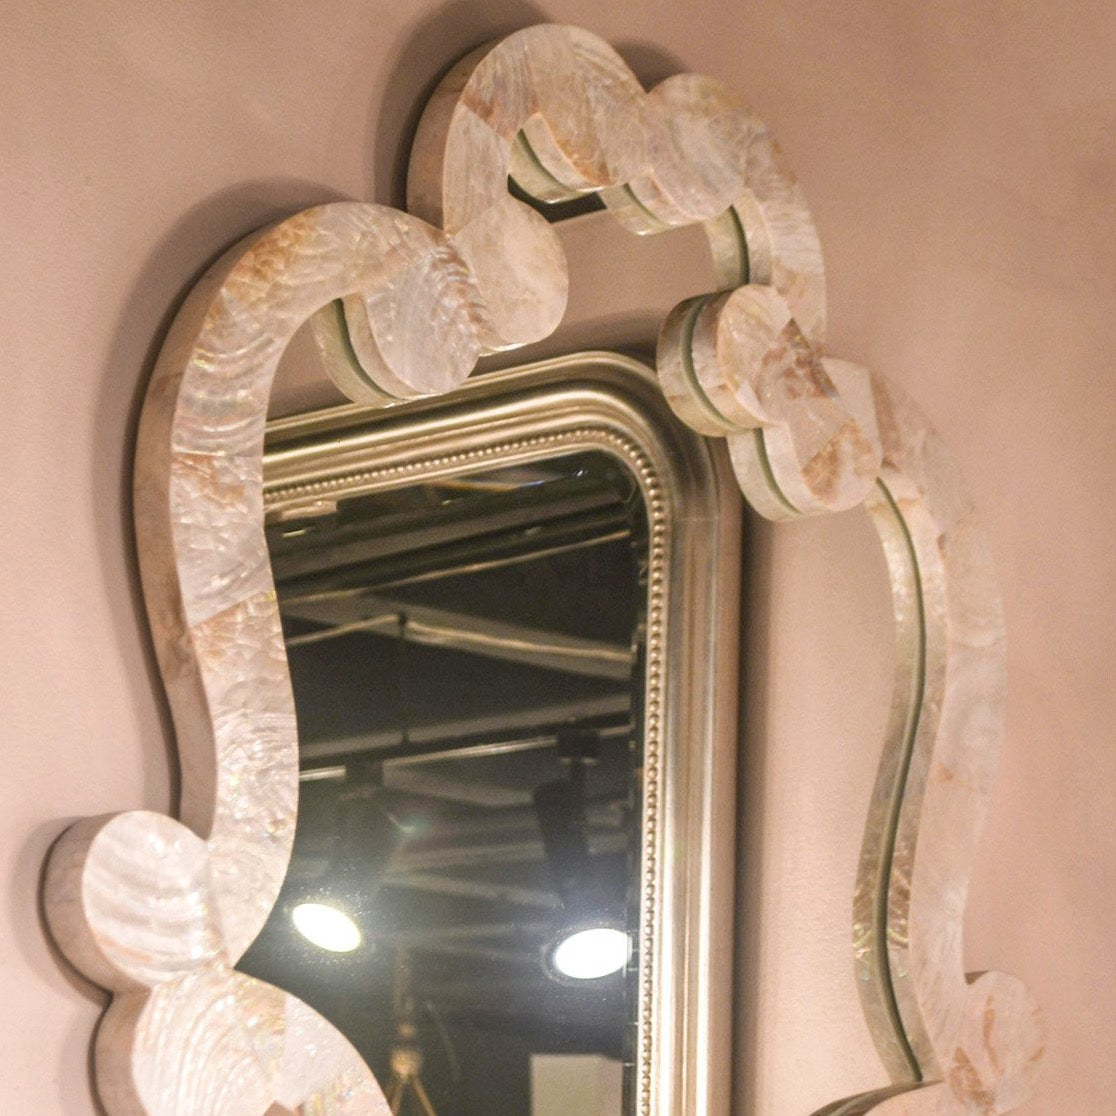 Made Goods Mabel Oval Wall Mirror Kabibe Shell white pristine showroom